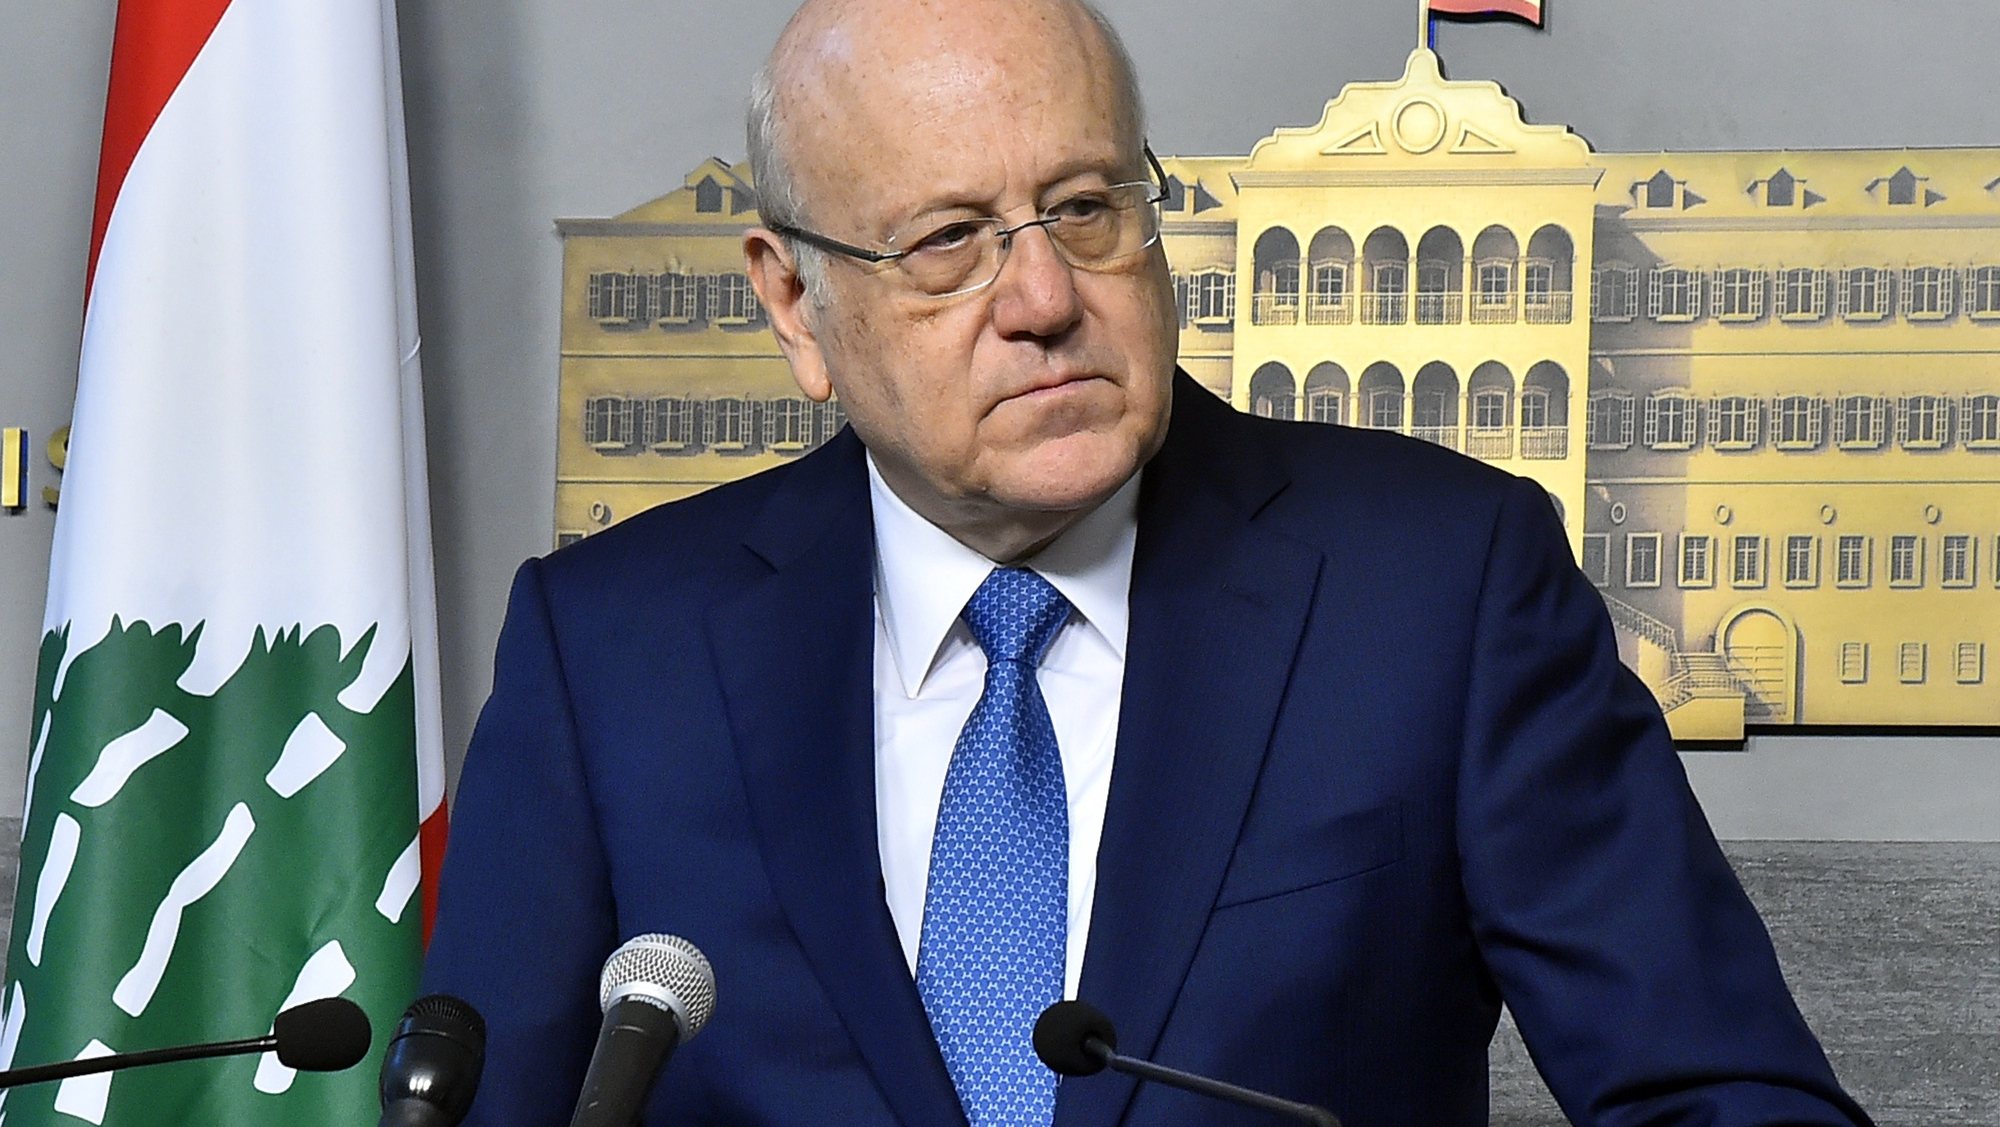 epa10545351 A handout photo made available by the Lebanese Government photography provider Dalati and Nohra shows Lebanese caretaker Prime Minister Najib Mikati speaks during a news conference after a cabinet meeting at the government palace in downtown Beirut, 27 March 2023. Lebanese caretaker Prime Minister Najib Mikati said the Council of Ministers voted during its meeting on 27 March to move the clock forward one hour on Wednesday night 29 March.  EPA/DALATI&amp;NOHRA HANDOUT  HANDOUT EDITORIAL USE ONLY/NO SALES